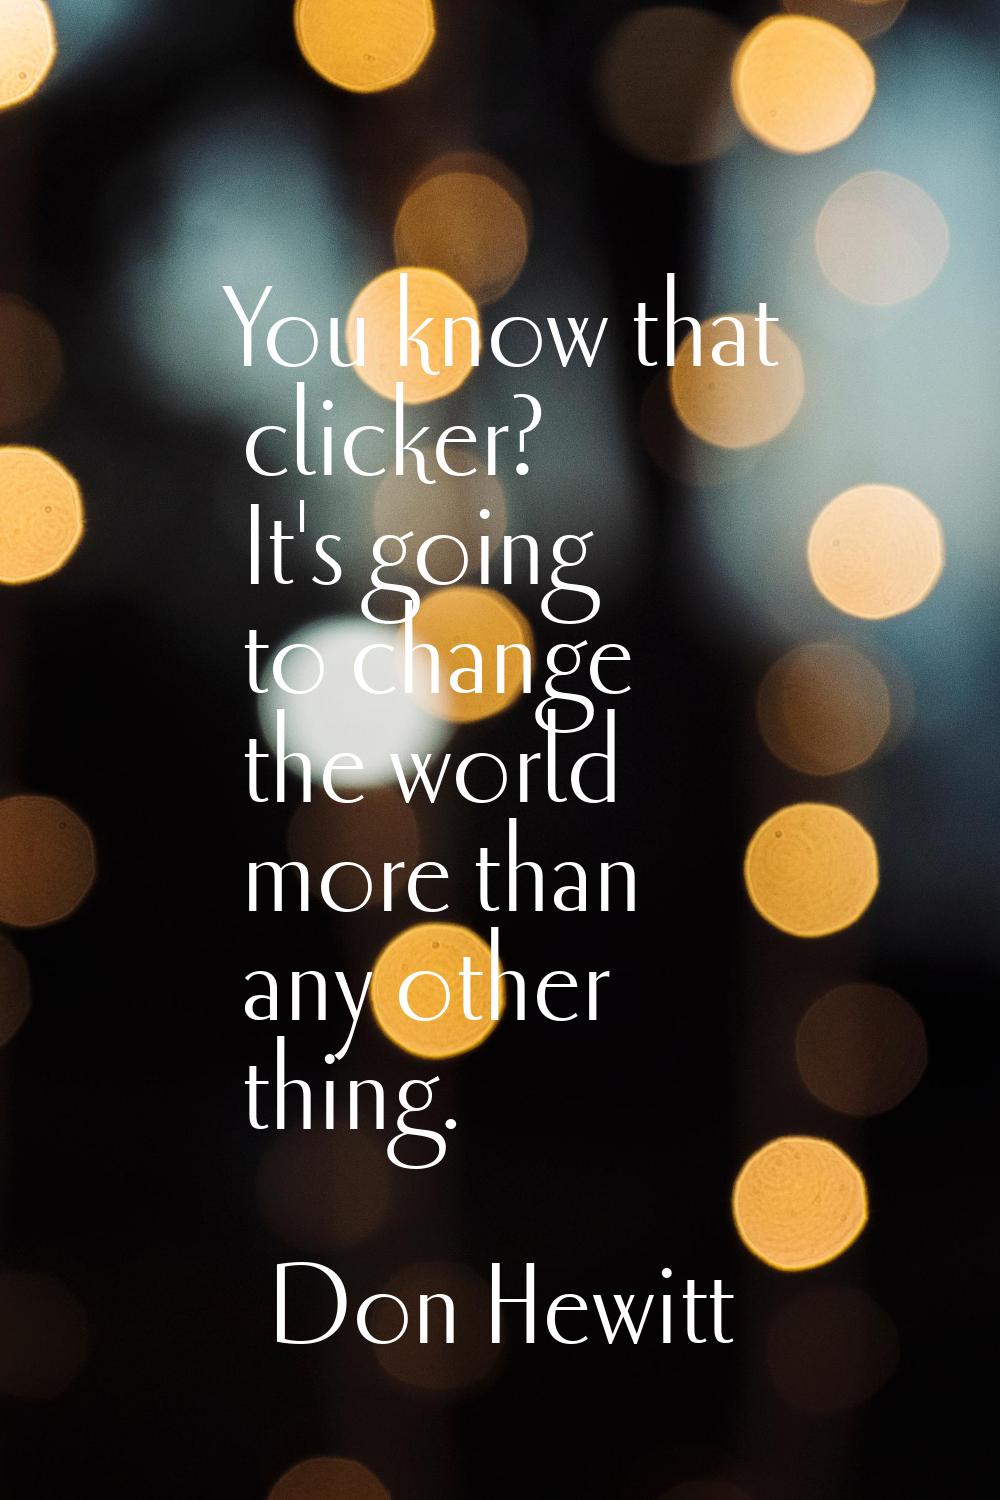 You know that clicker? It's going to change the world more than any other thing.